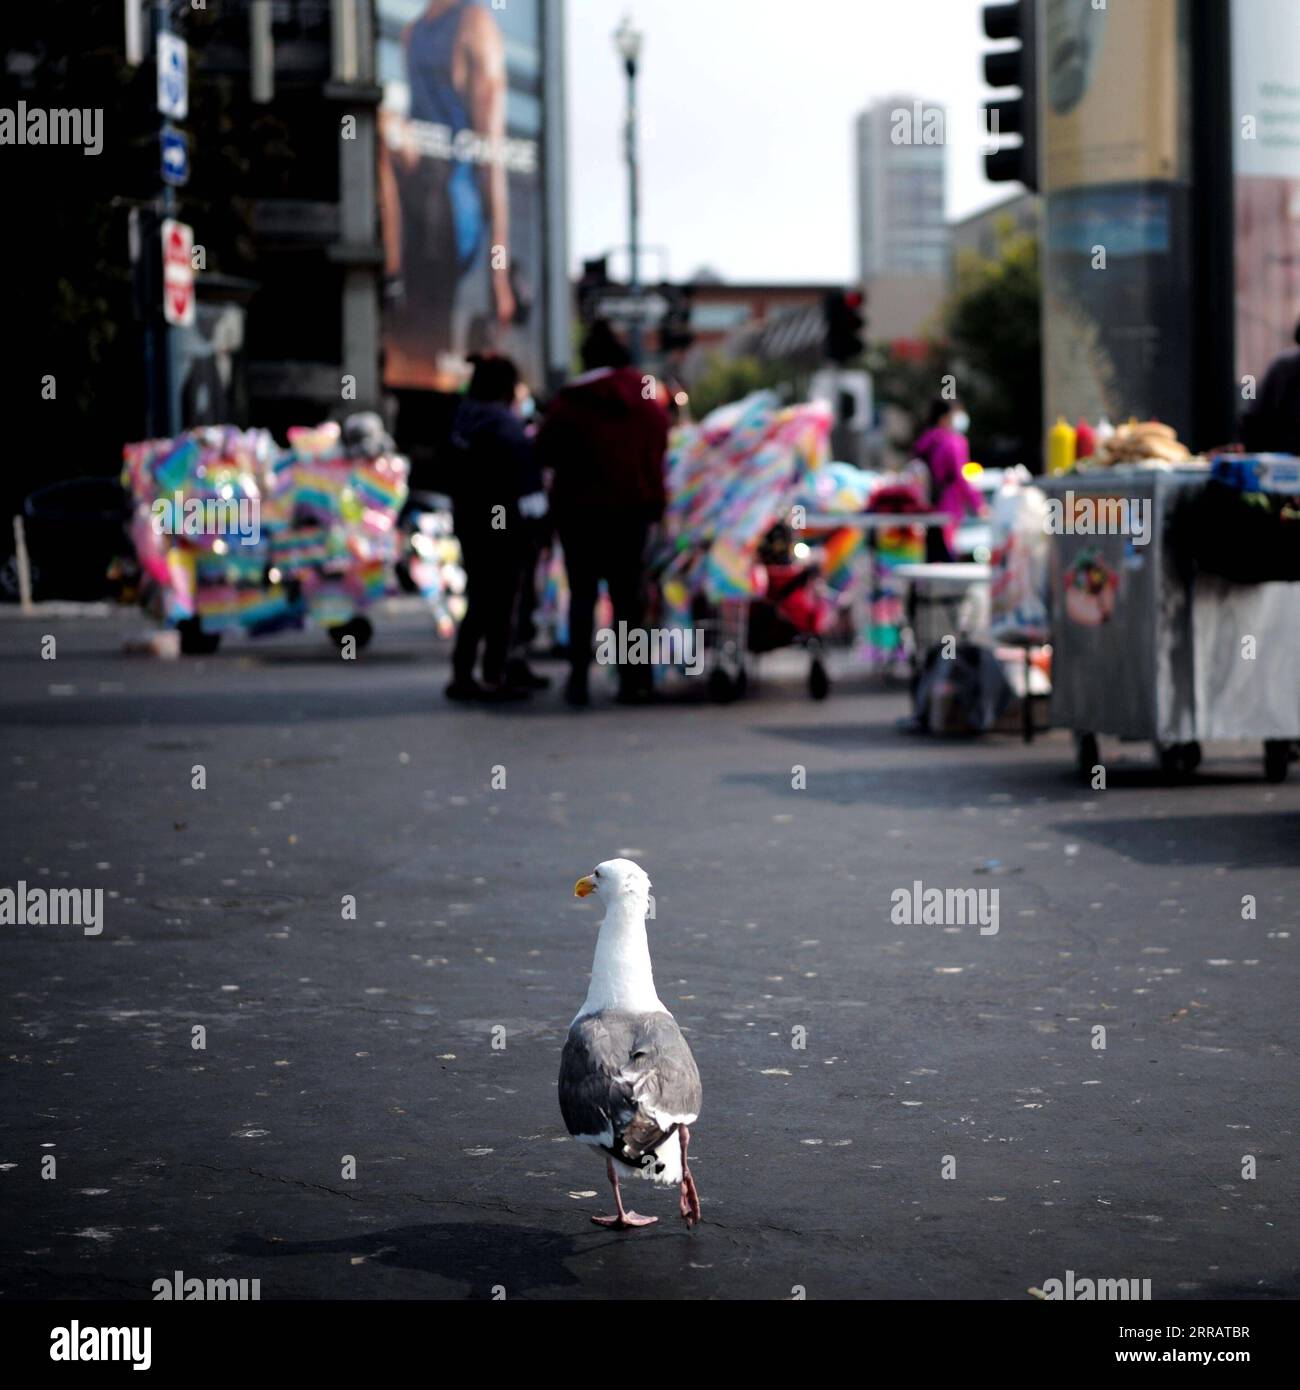 210816 -- SAN FRANCISCO, Aug. 16, 2021 -- A seagull wanders on a street in San Francisco, the United States, on Aug. 15, 2021. San Francisco Mayor London Breed announced last Thursday that the city will require businesses in certain high-contact indoor sectors to obtain proof of vaccination from their patrons and employees for them to go inside those facilities. The health order requirement for proof of full vaccination for patrons of indoor public settings, including bars, restaurants, clubs and gyms goes into effect on Aug. 20. To preserve jobs while giving time for compliance, the proof of Stock Photo